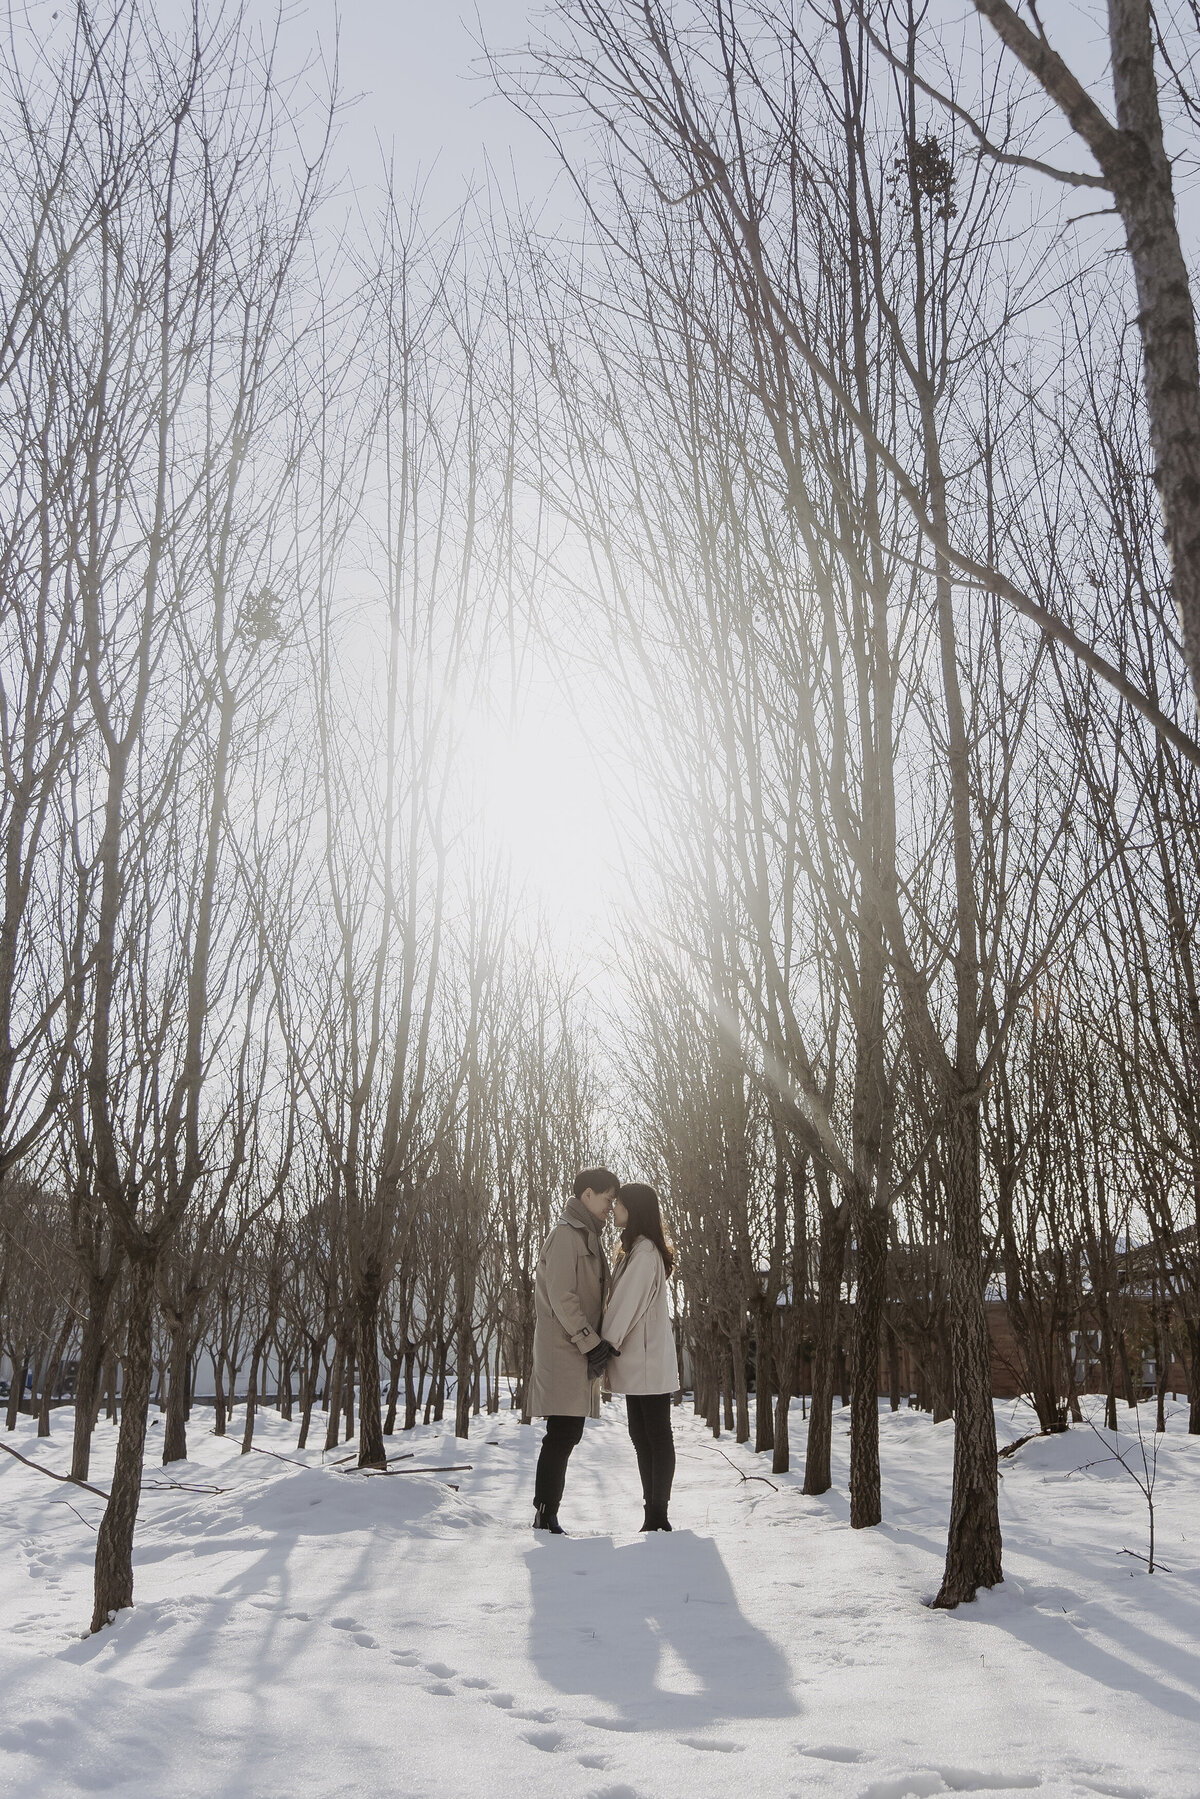 the couple hold hands and put their foreheads together on a snowy forest under the sun in damyang